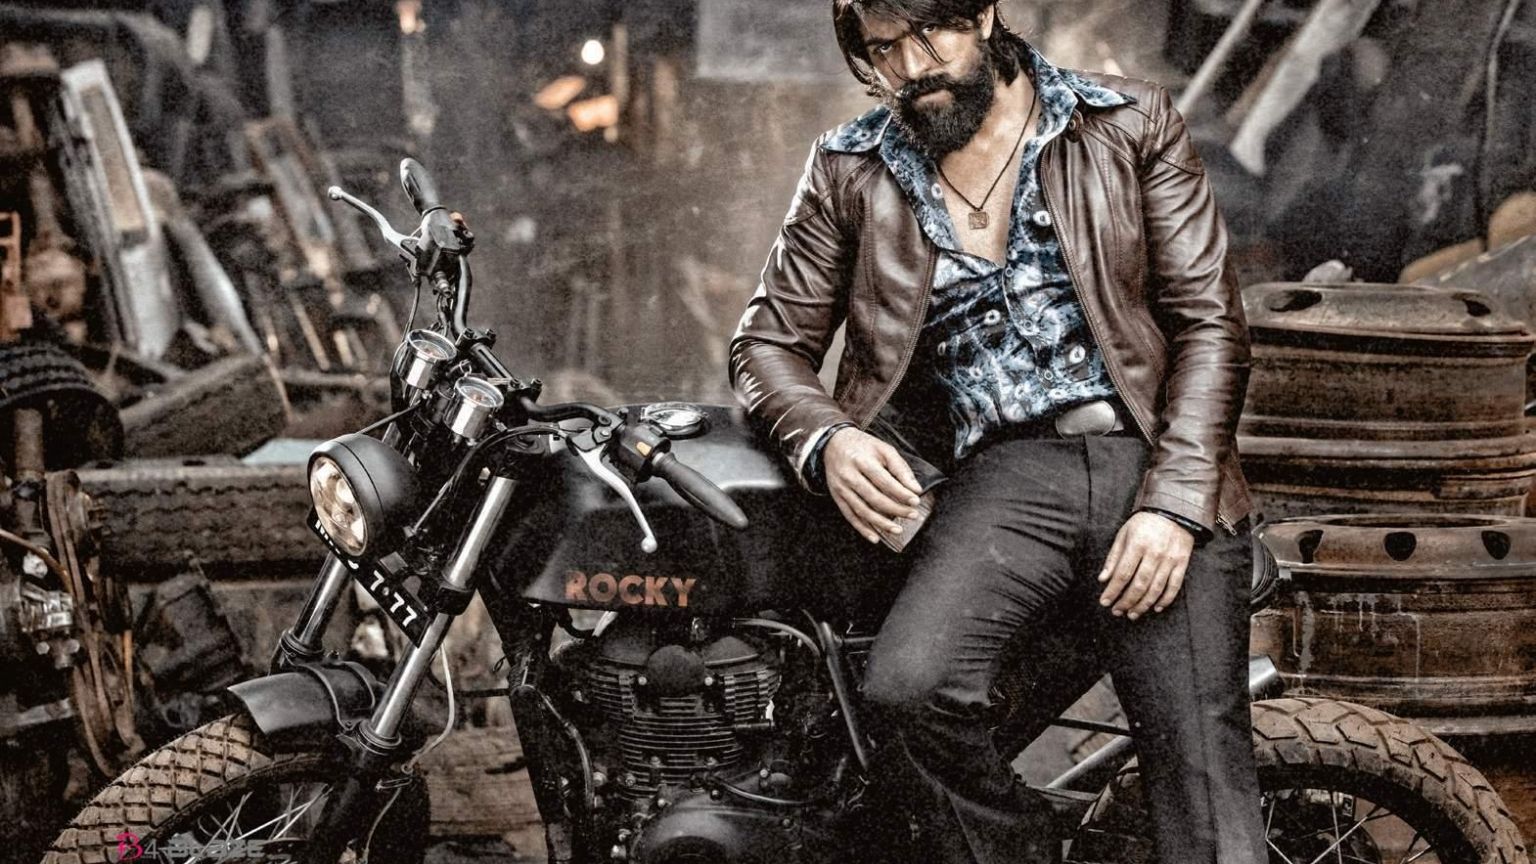 KGF Rocky Wallpapers - Wallpaper Cave